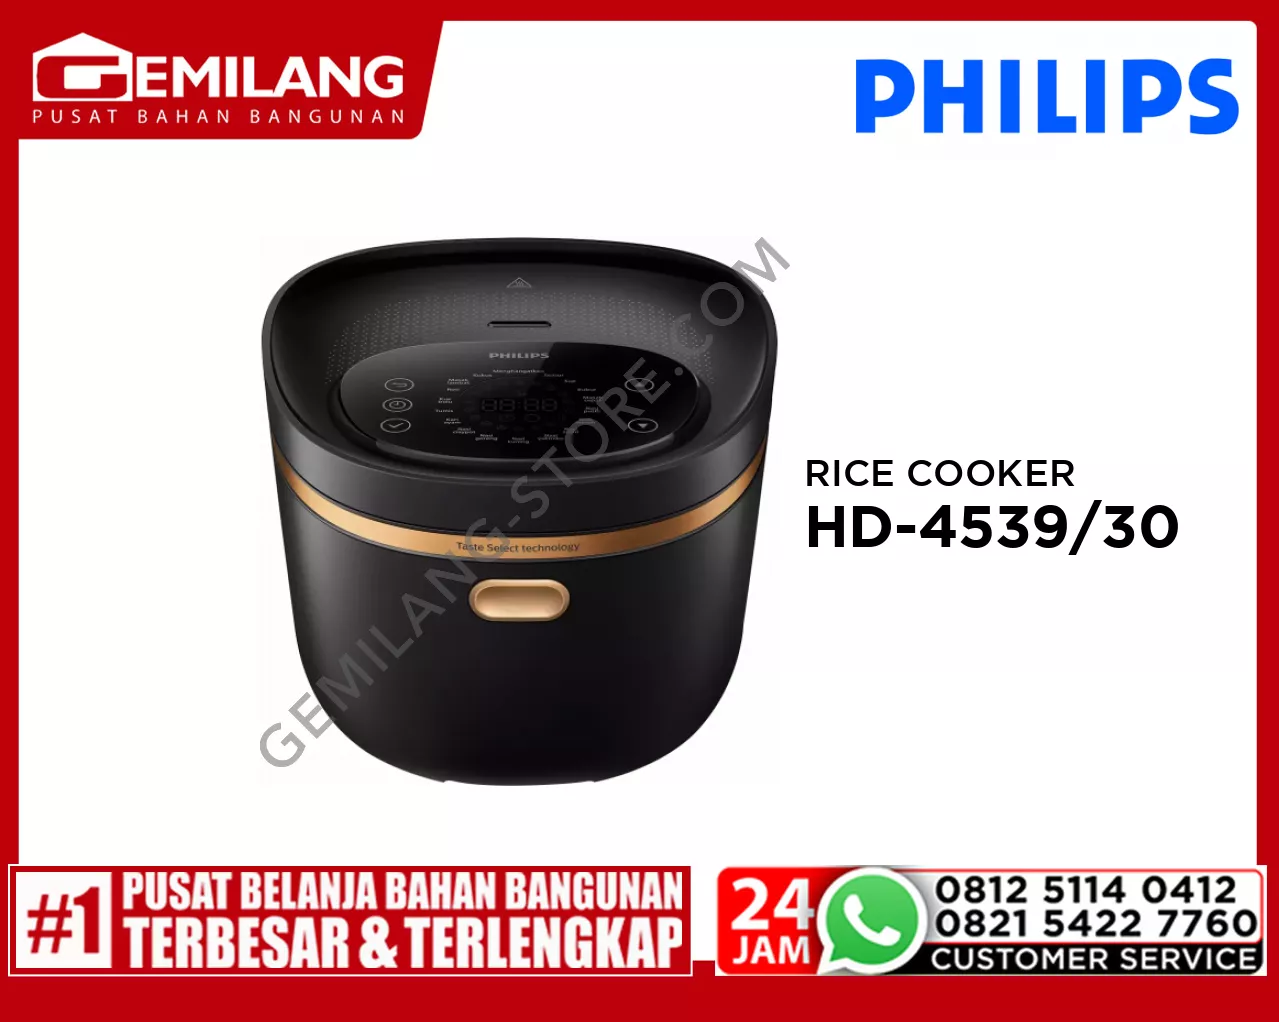 PHILIPS RICE COOKER HD-4539/30